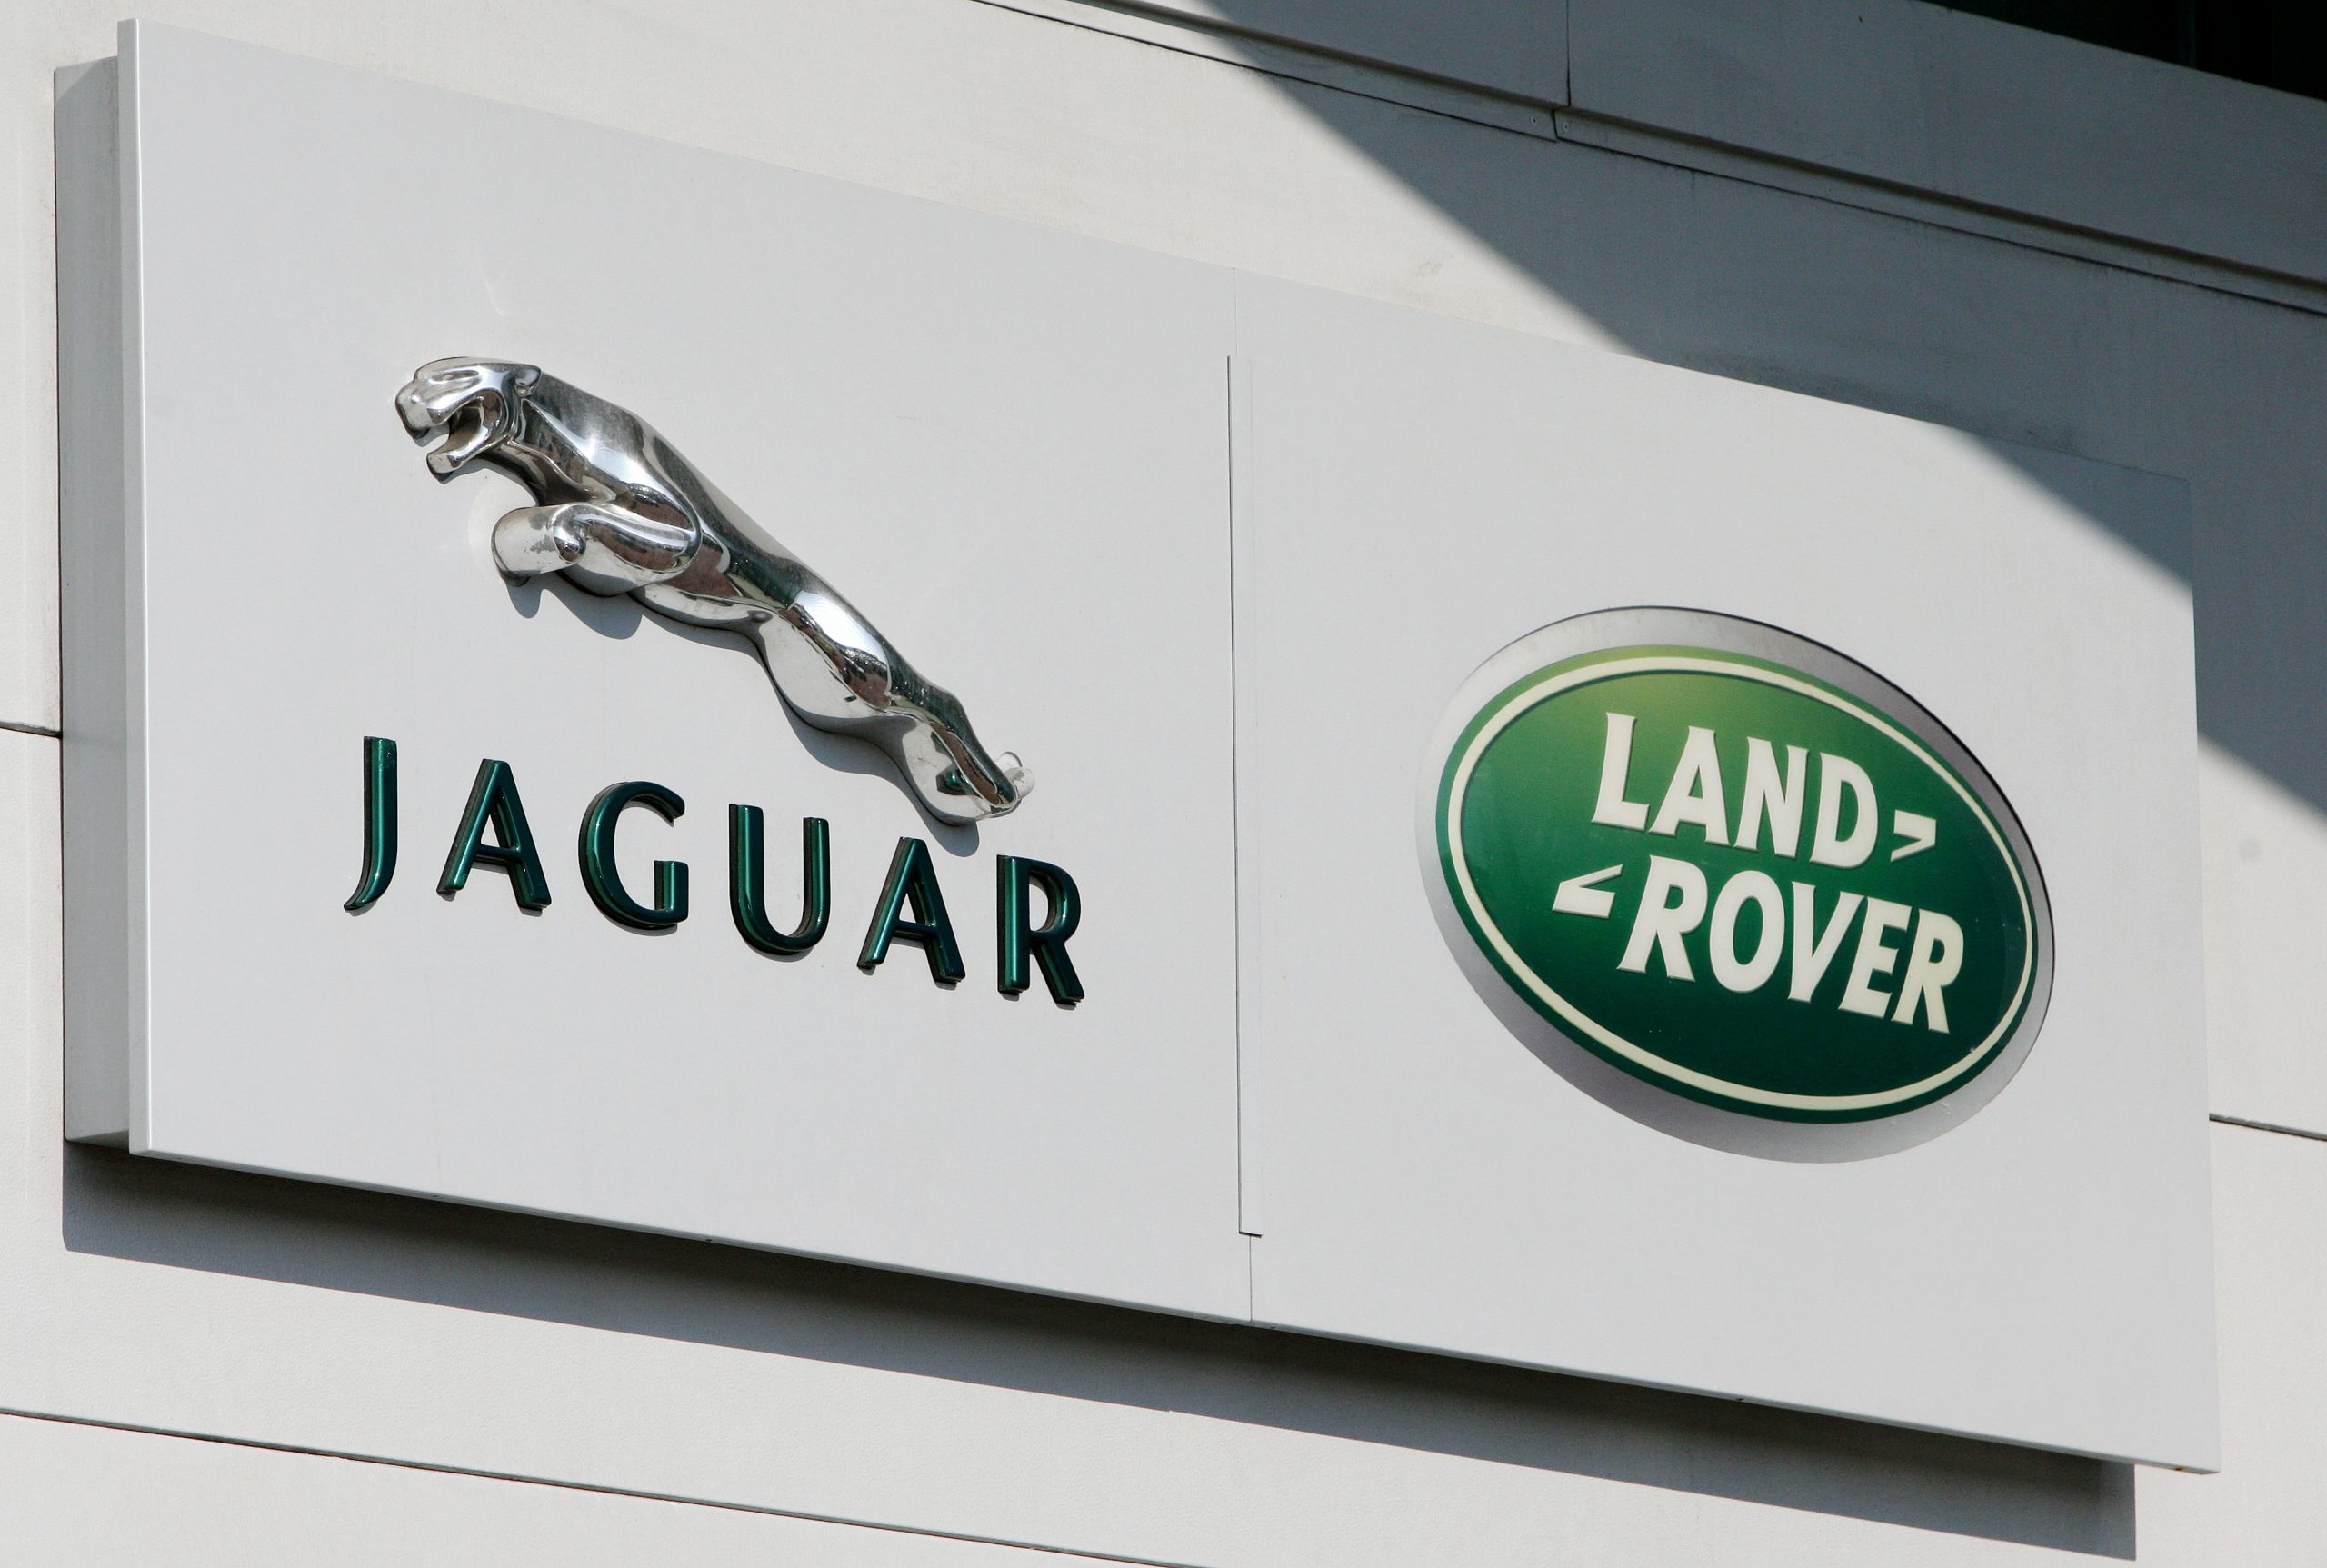 Comment JLR’s electric dreams will mean playing catch up